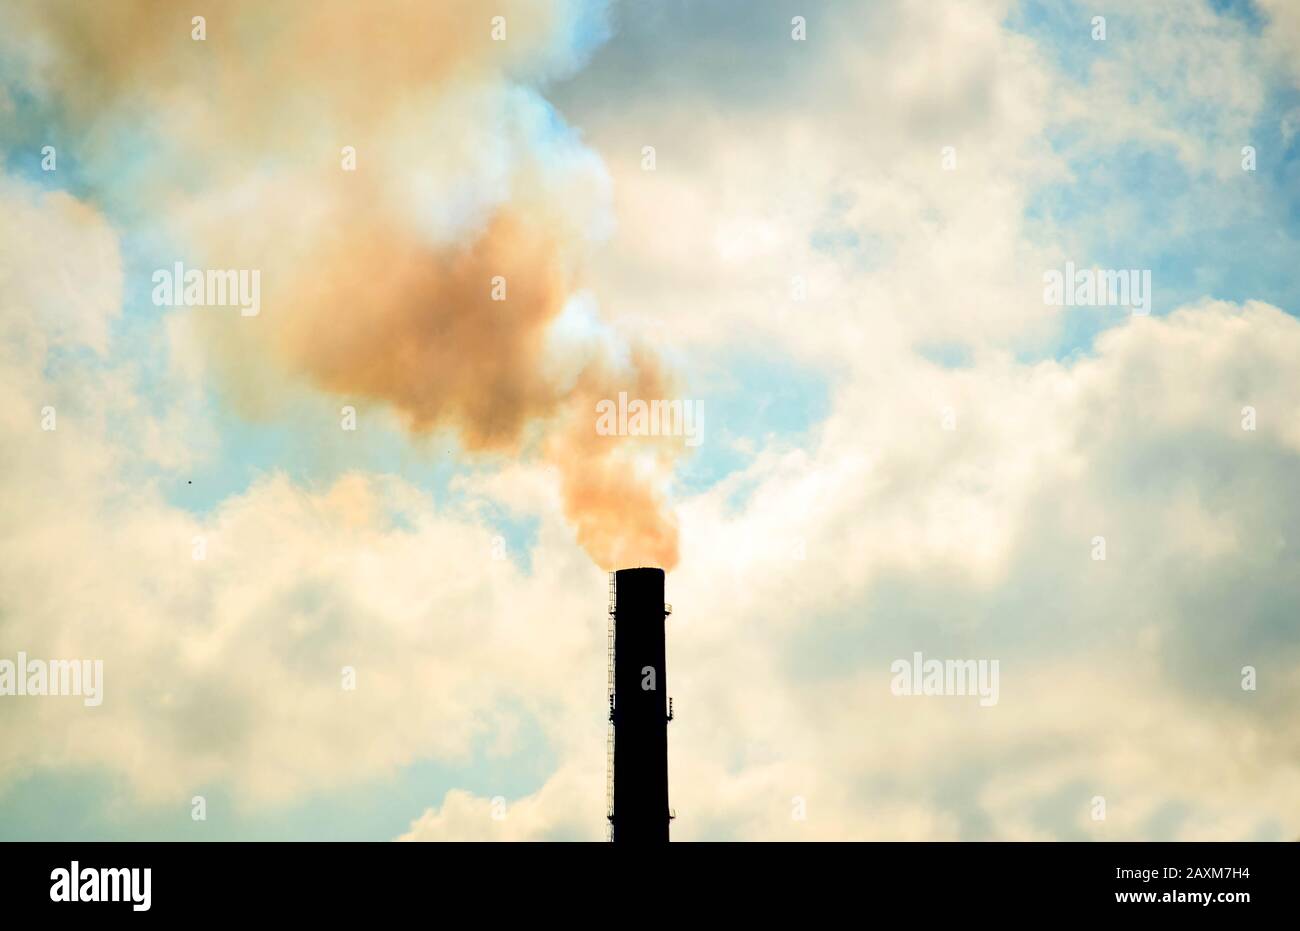 technogenic contrasting background tip of the pipe with smoke sky with clouds Stock Photo